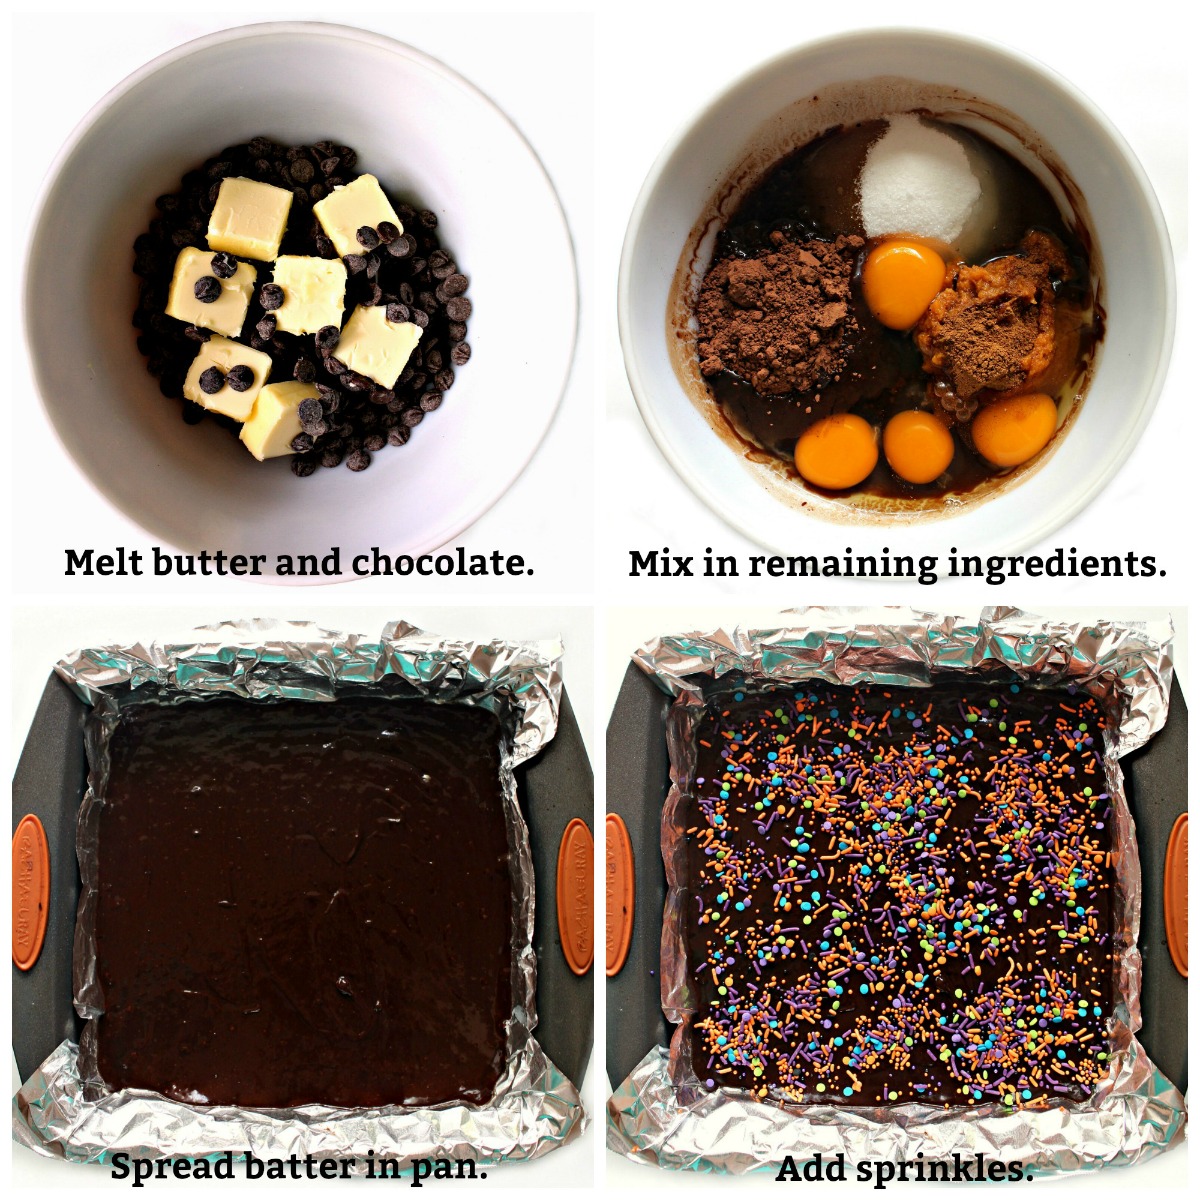 Instructions; melt butter and chocolate, combine all ingredients, spread in pan, add sprinkles.